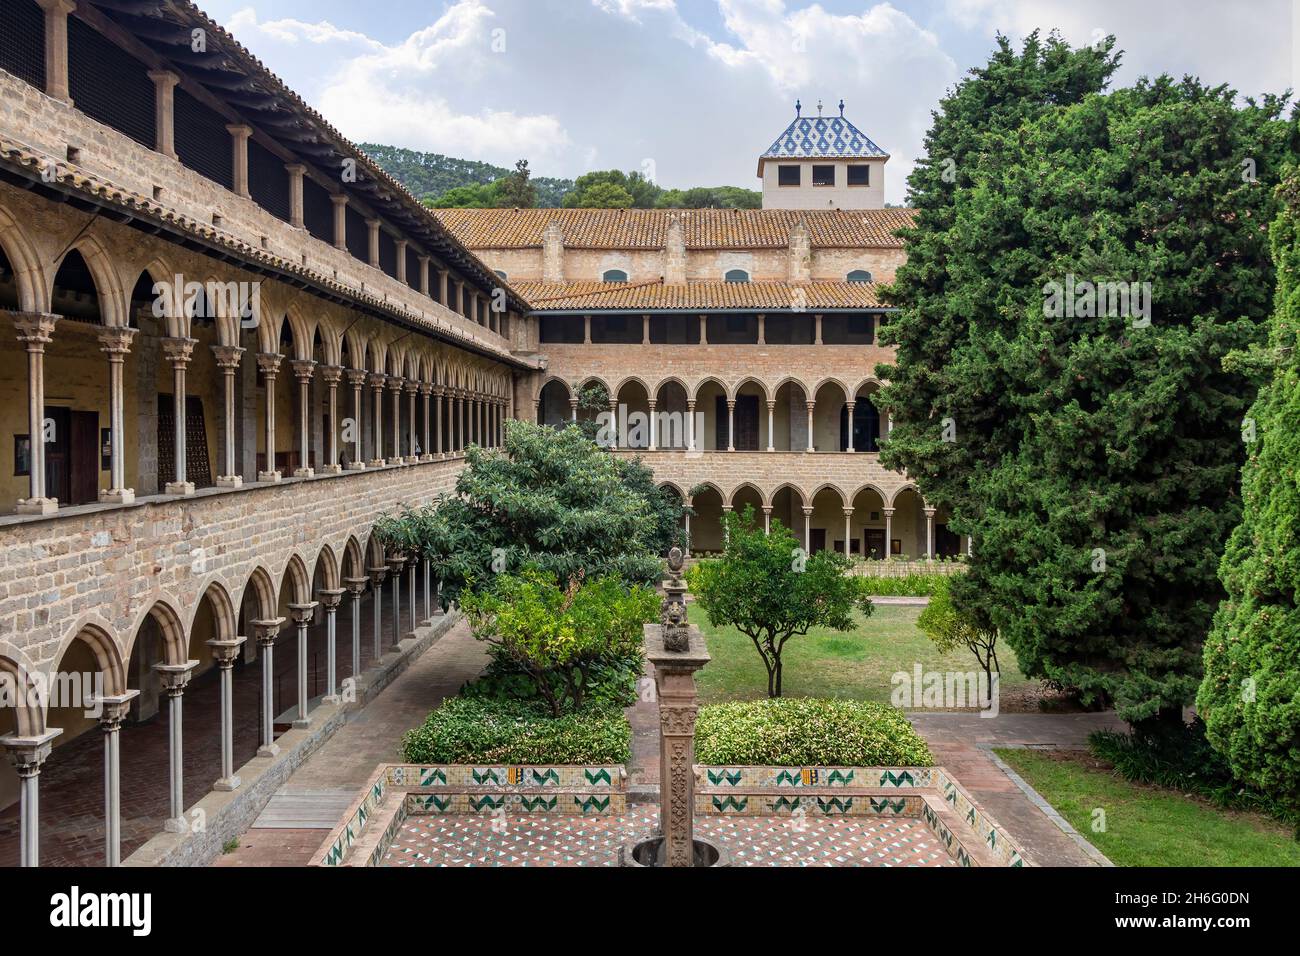 Exterior of the Monastery of Santa María de Pedralbes. The Royal Monastery of Santa María de Pedralbes is a set of Gothic-style monuments located in t Stock Photo